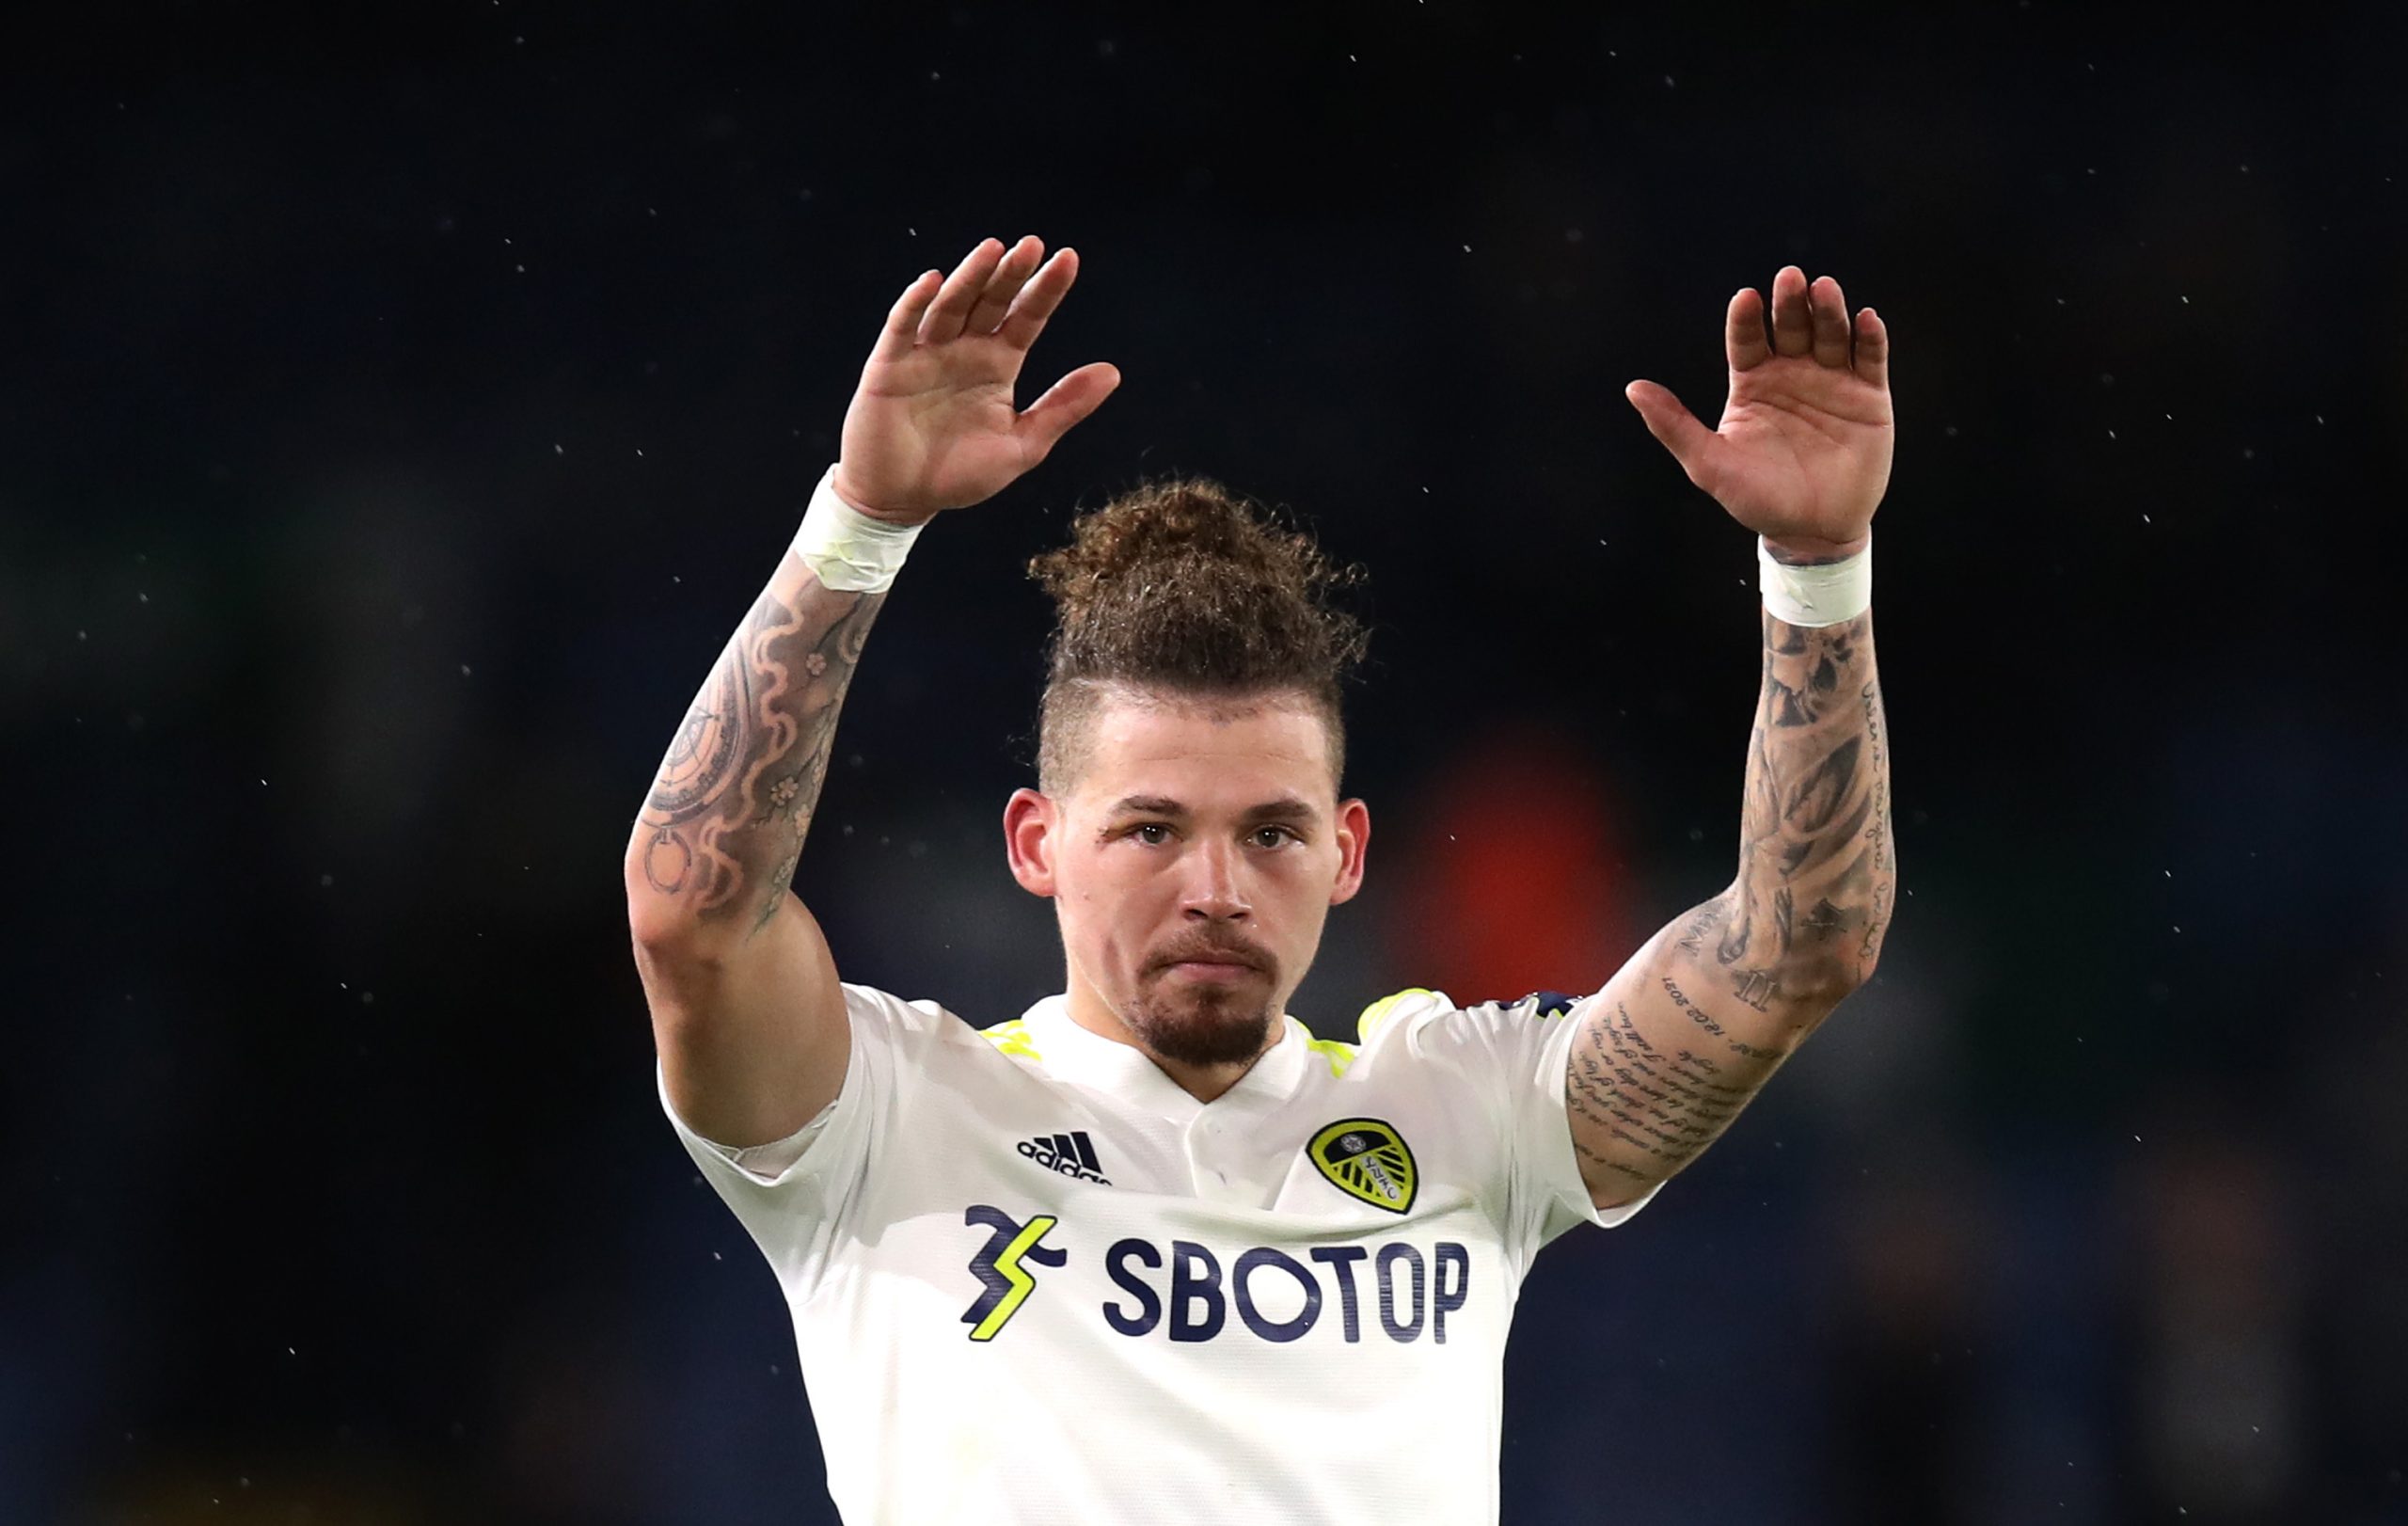 Leeds United star Kalvin Phillips will reject approaches from Manchester United this summer.